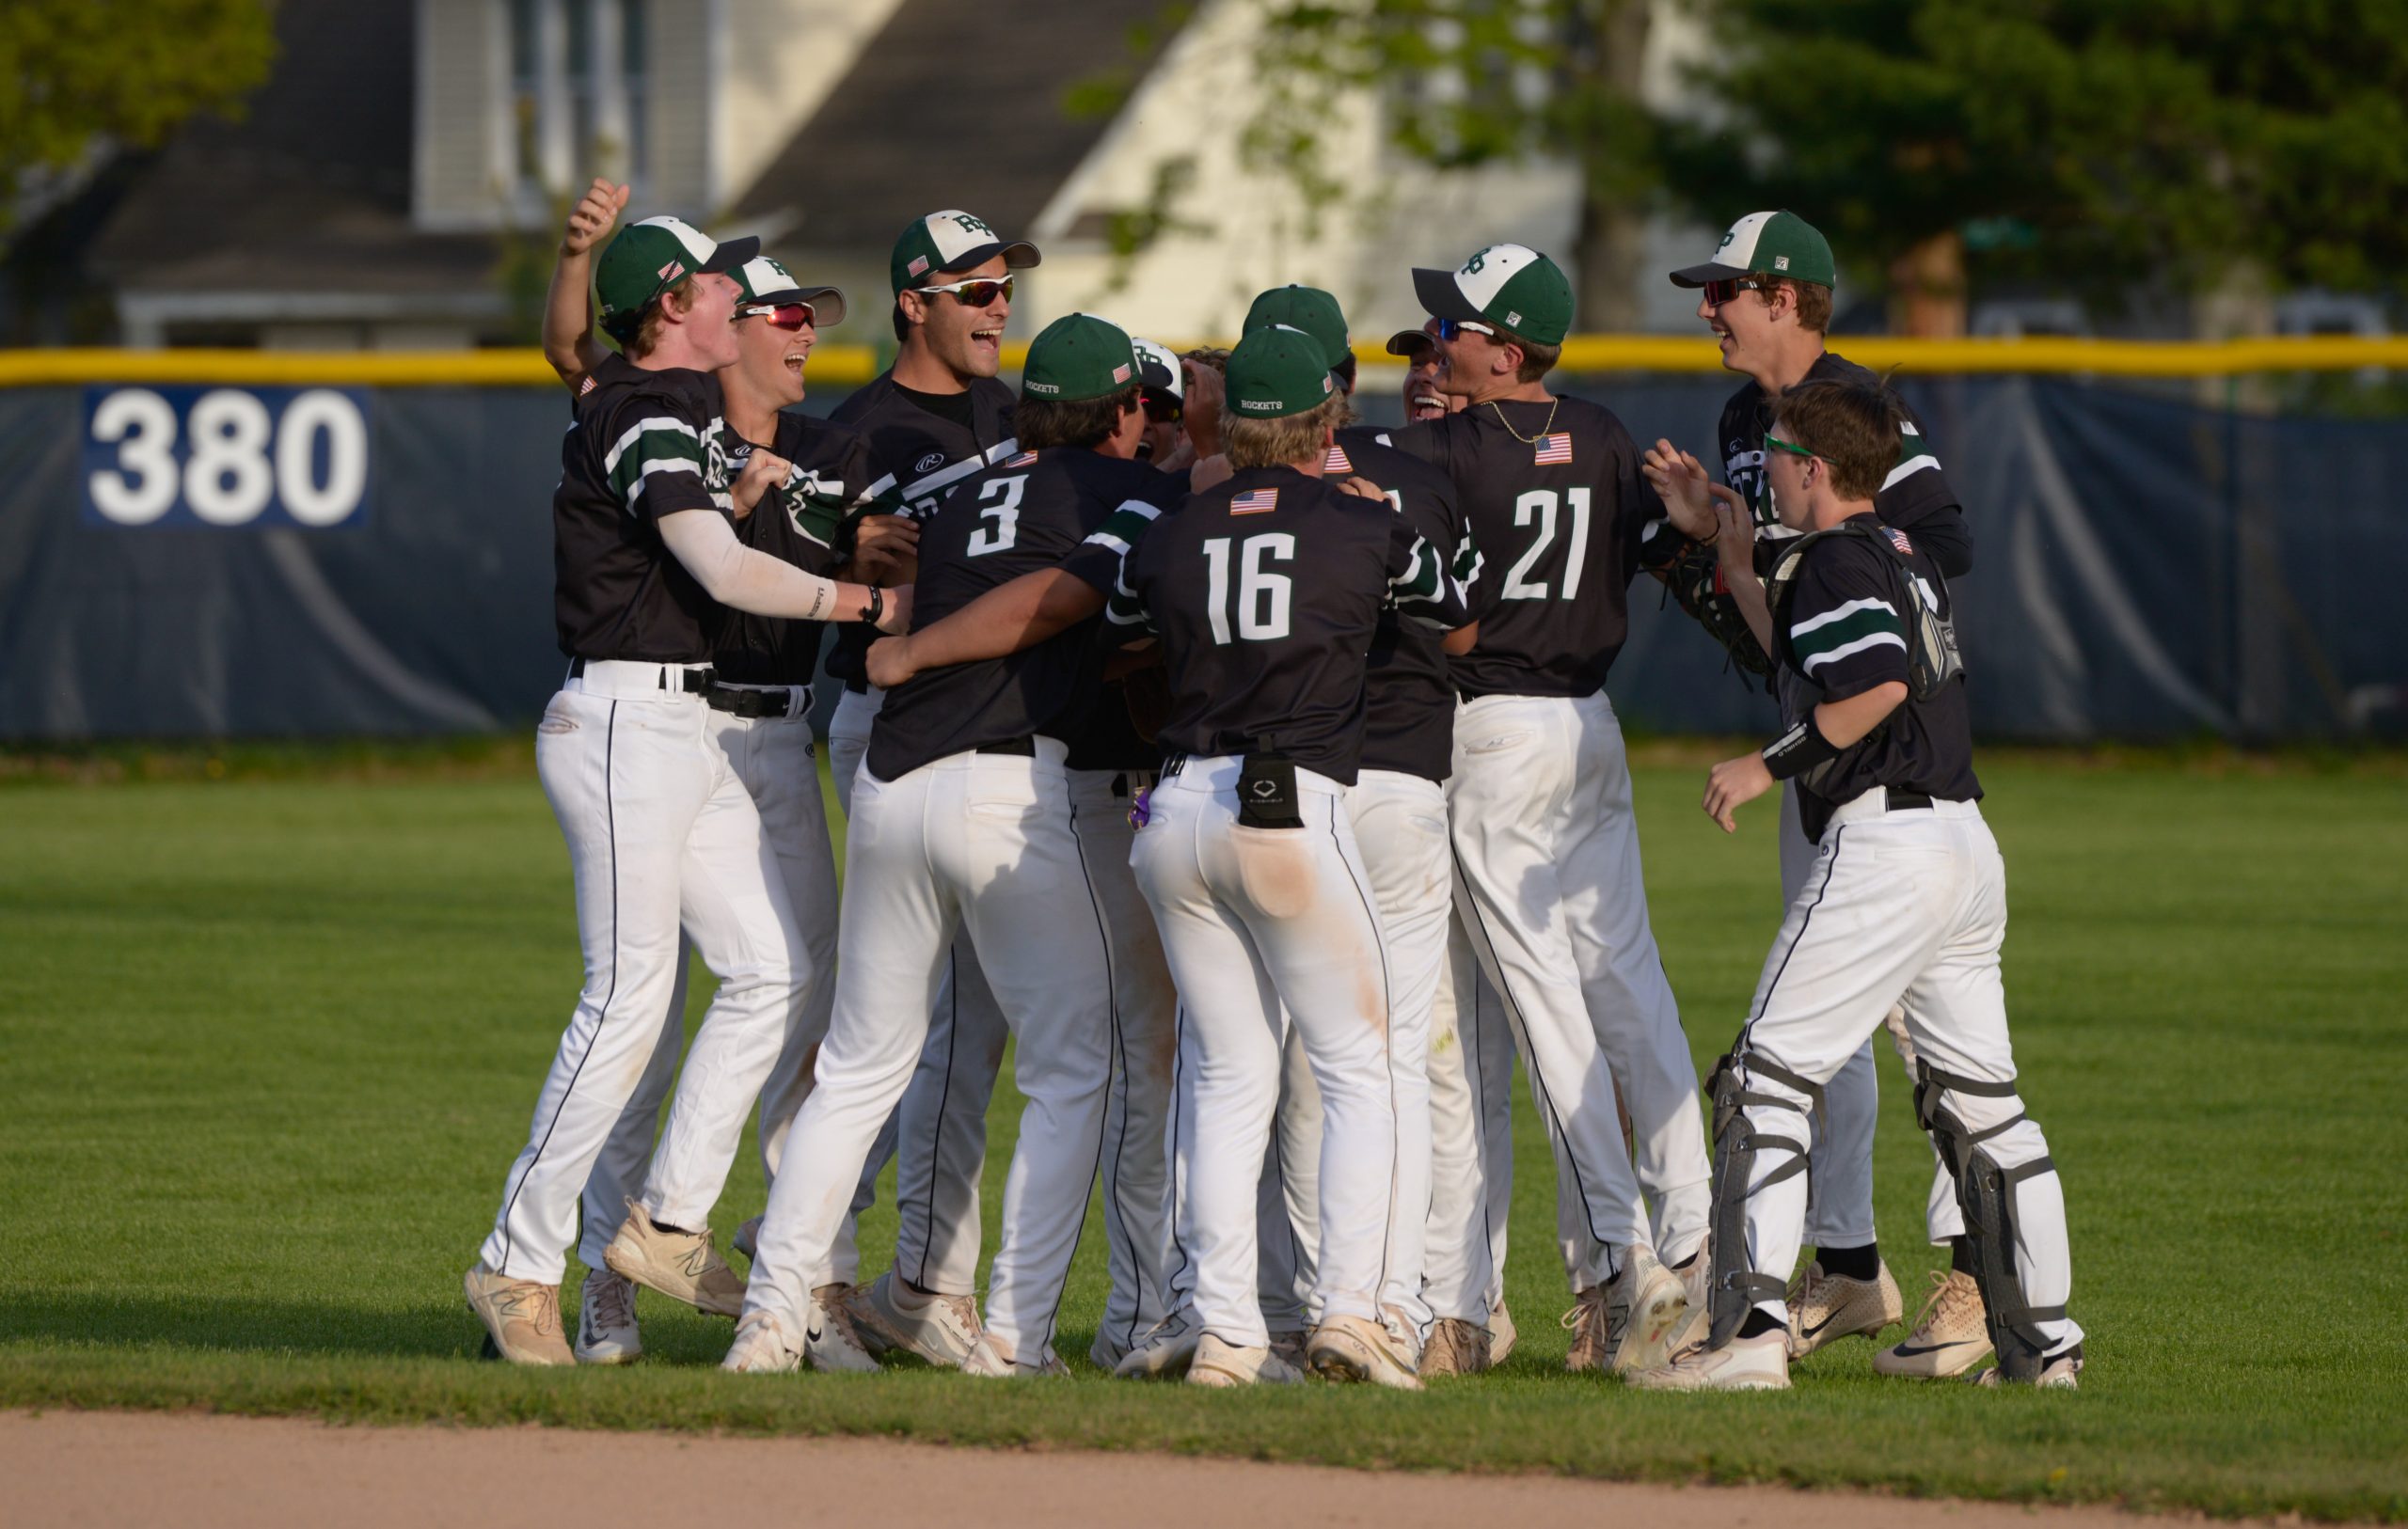 Reeths-Puffer survives tough GMAA field to capture baseball championship